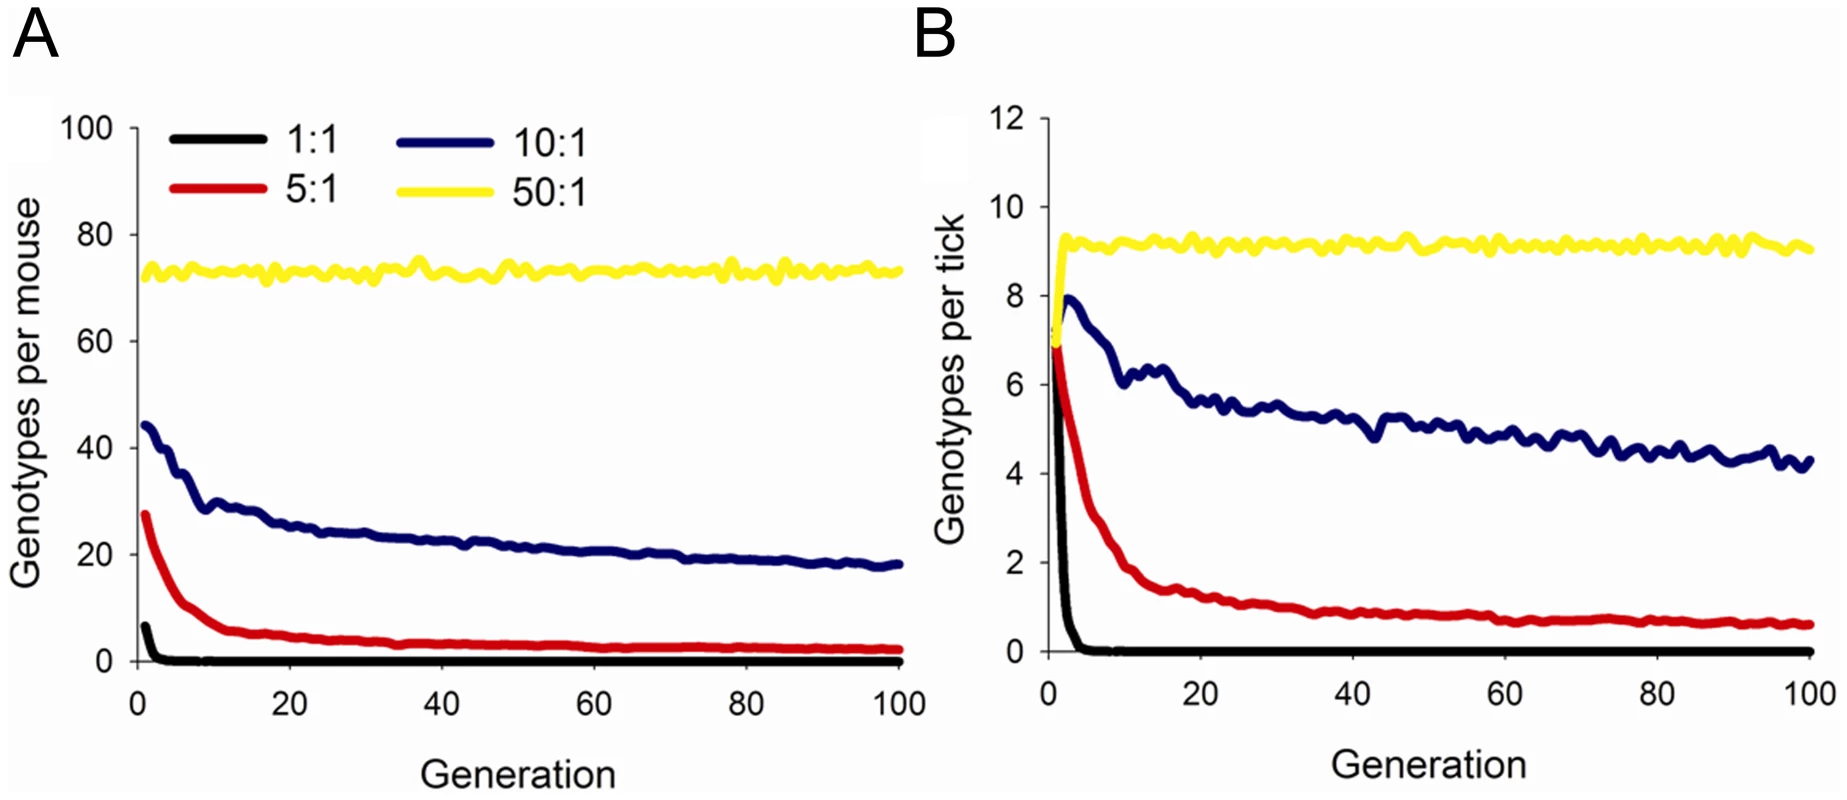 Maintenance of genotypic diversity in mice and ticks over 100 generations.